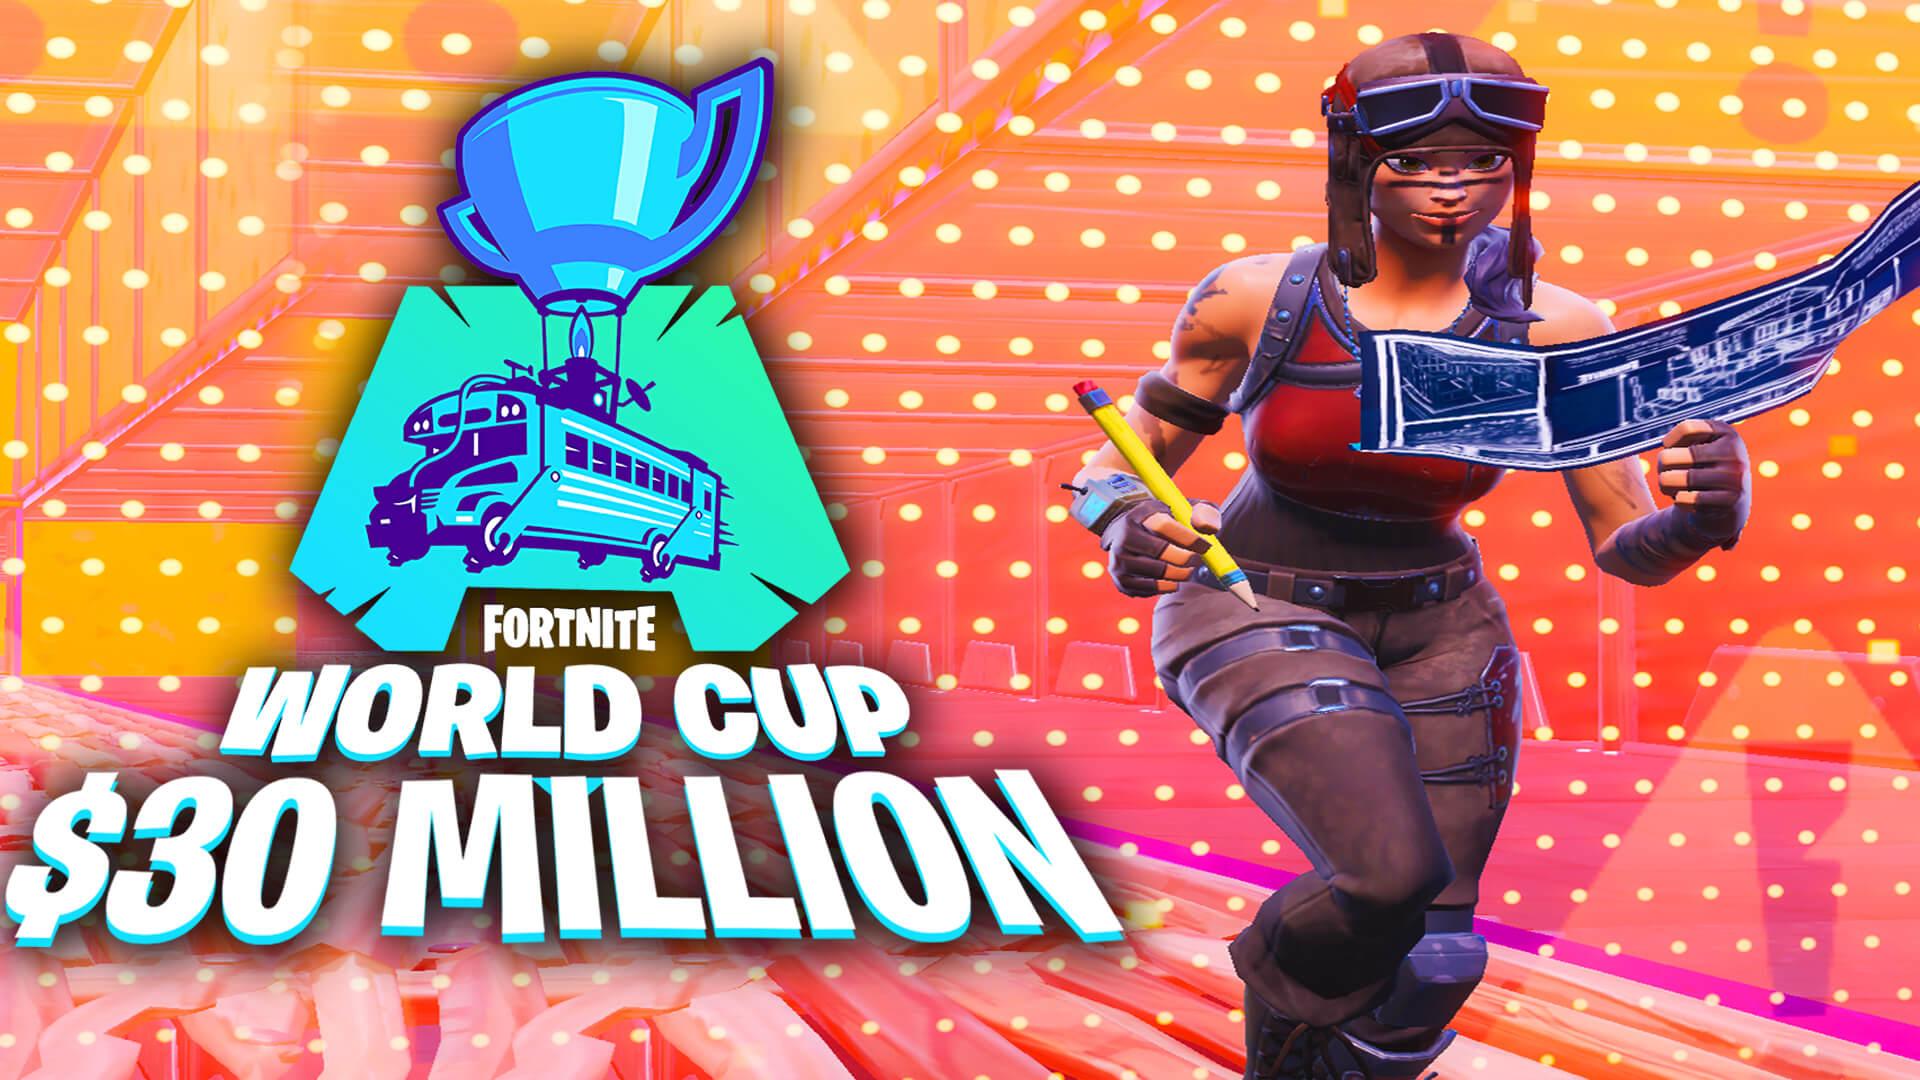 Fortnite World Cup Wallpapers Wallpaper Cave